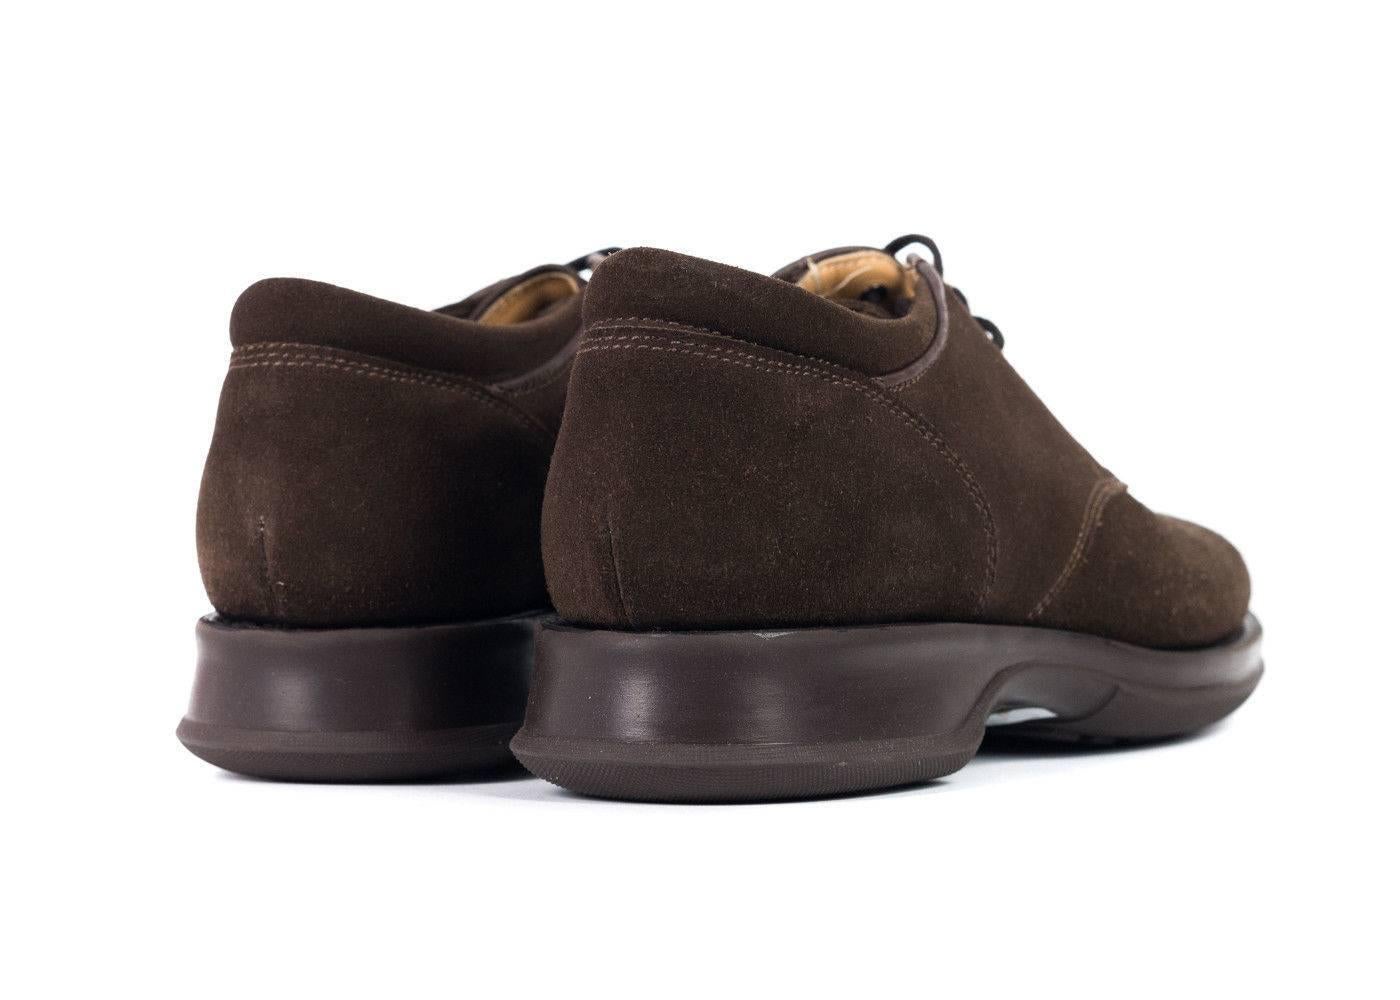 Church's lace up shoes in a gorgeous chocolate brown sueded leather. These derby shoes are perfect for professional occasions or worn as a trendy casual look. Pair it with a pair of culottes or black jeans with a striped button down or feminine